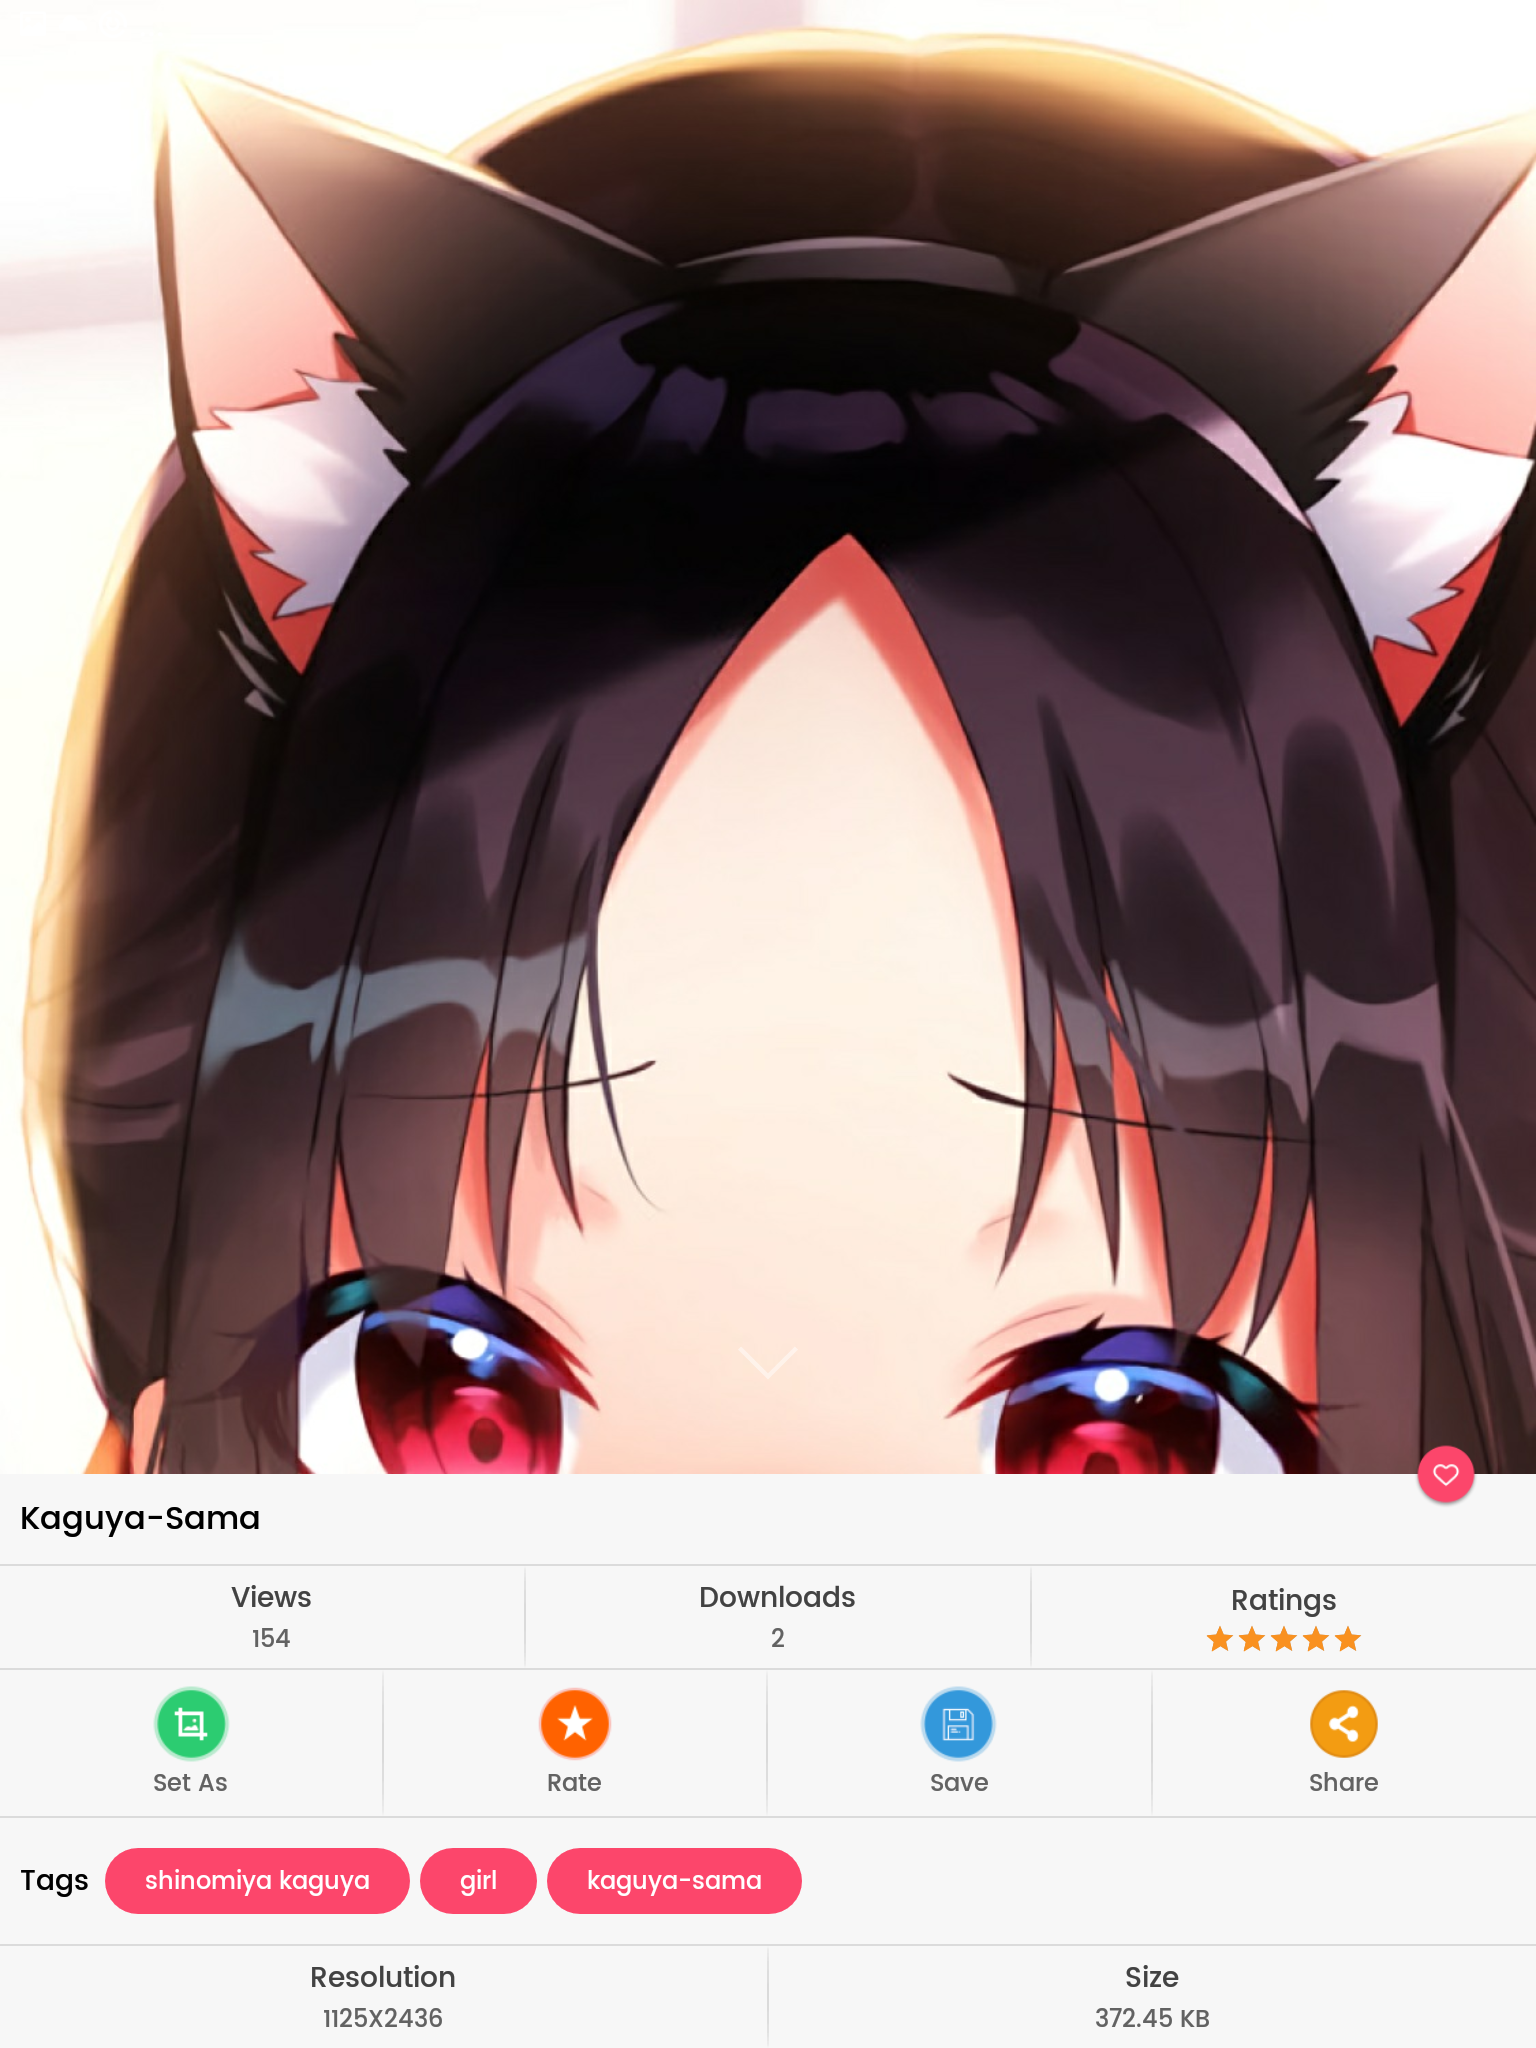 Wallpaper Anime 4K | Android | GiveMeApps